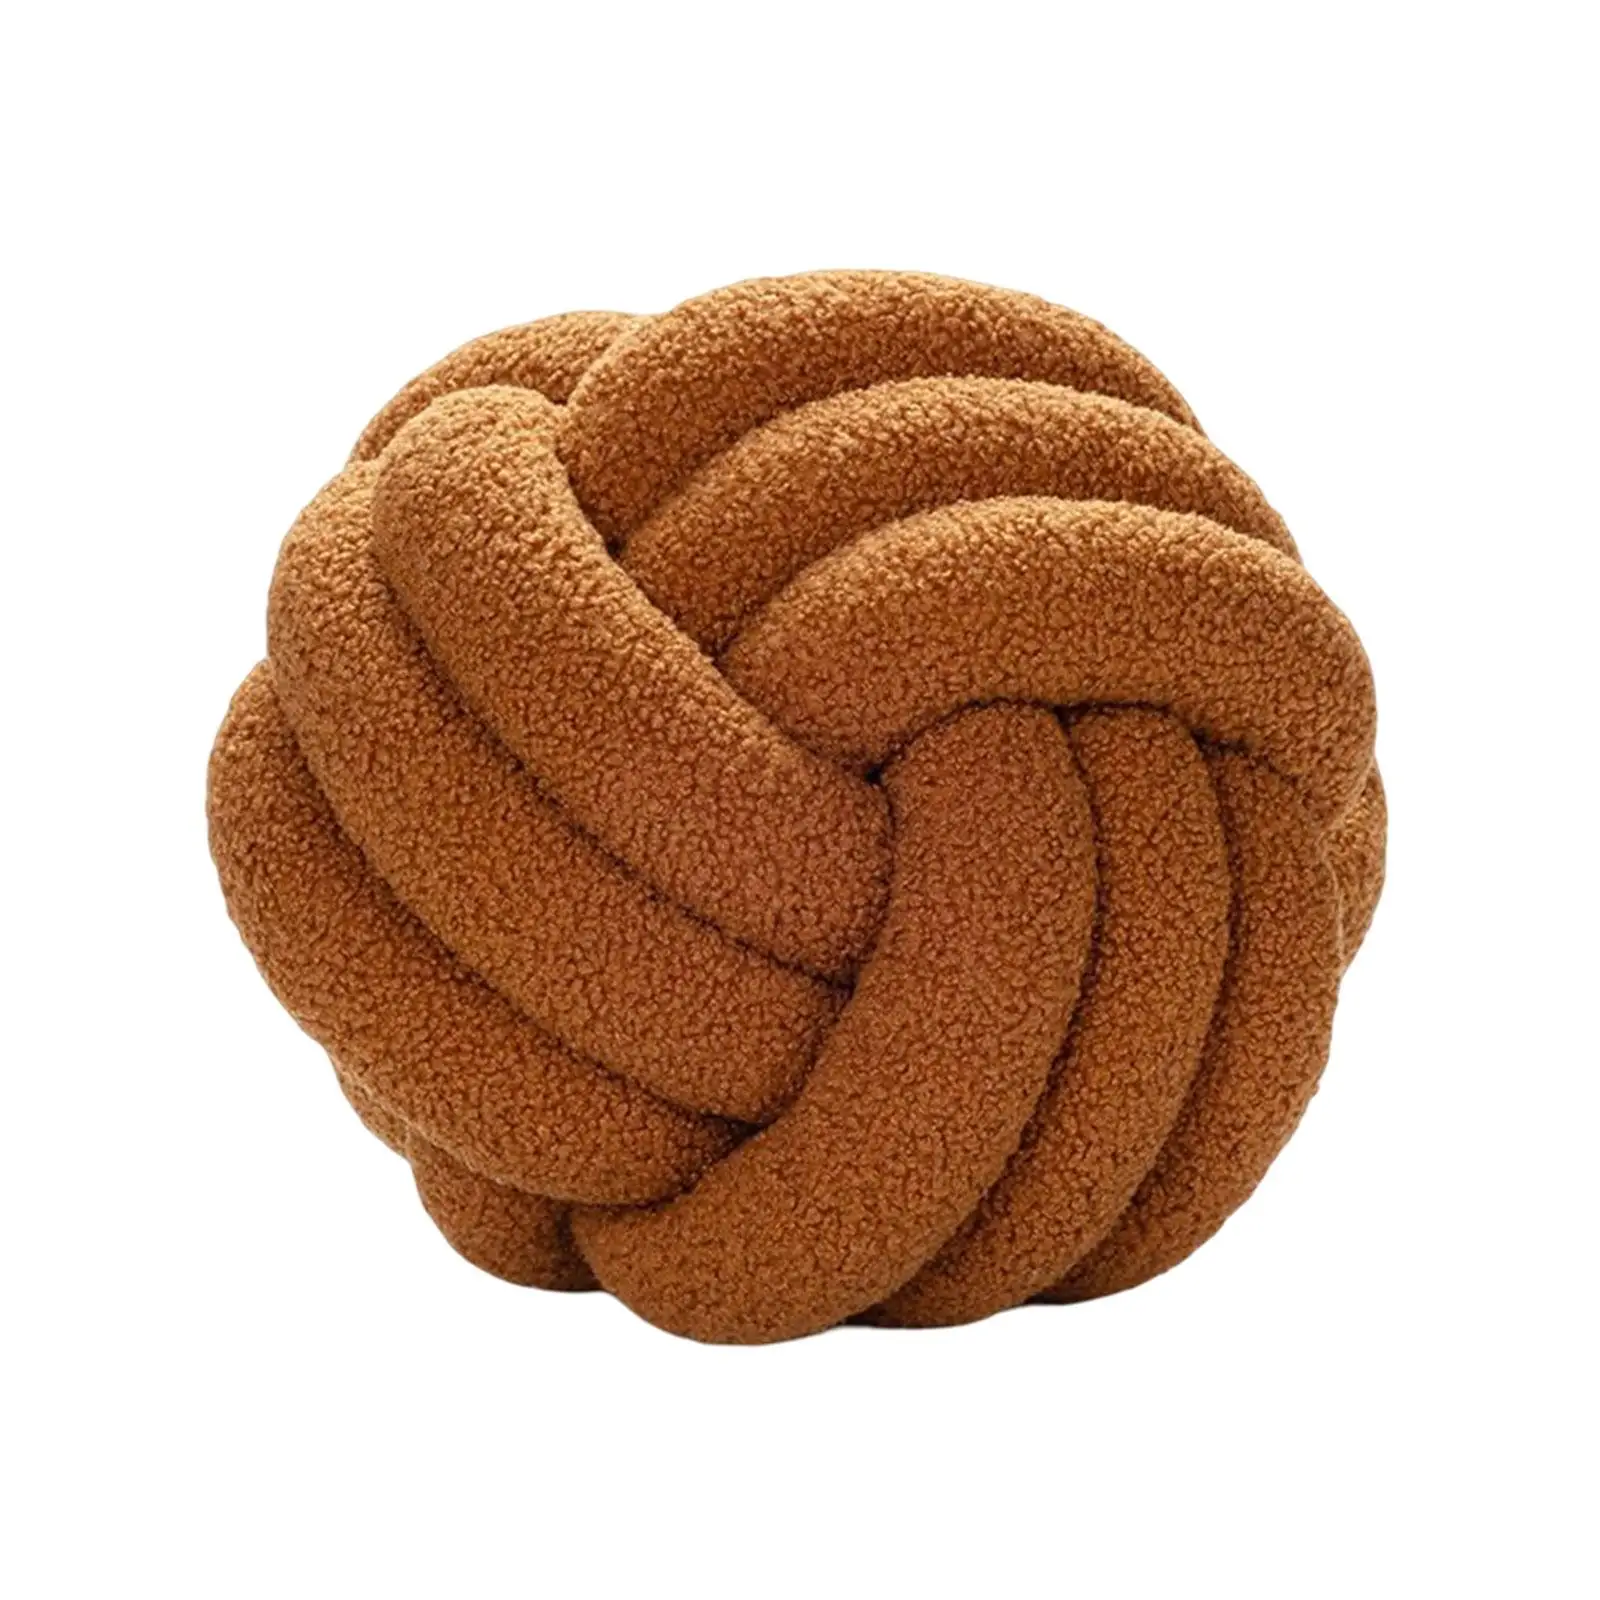 Hand Woven Round Plush Knotted Throw Pillow Diameter 22cm Multiple Uses Accessories